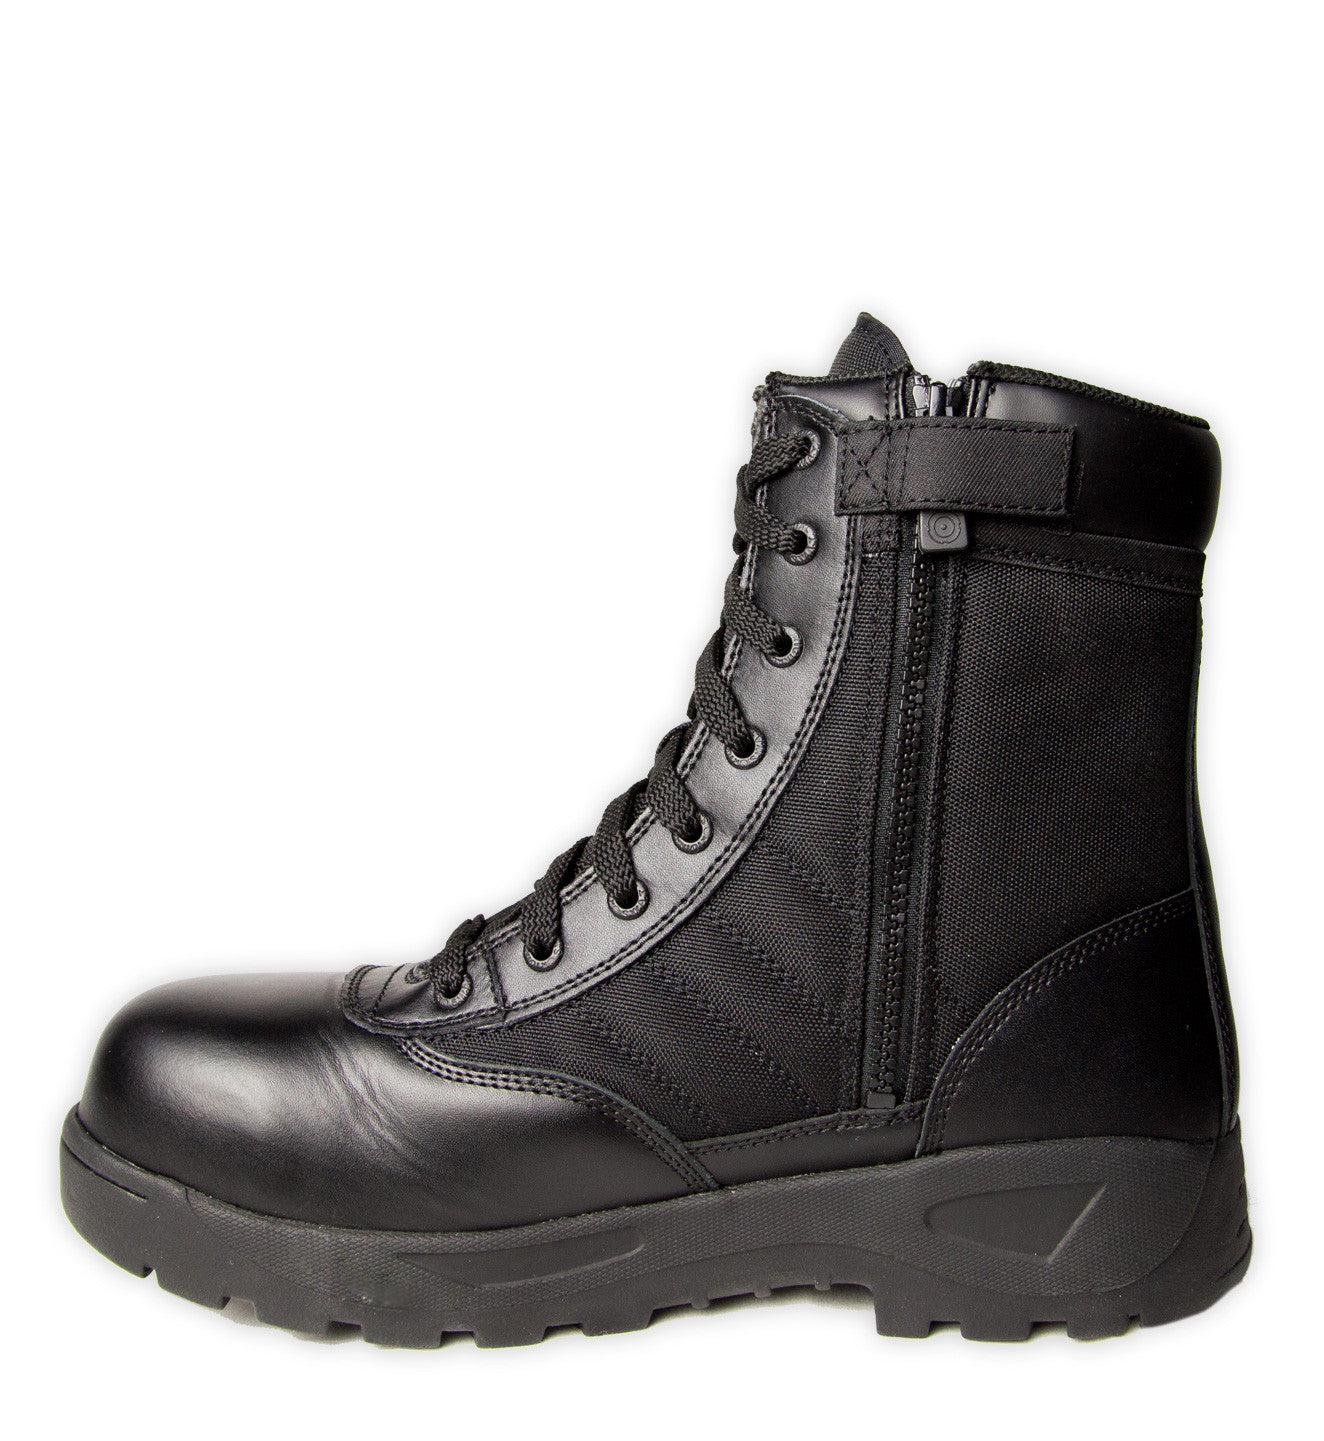 swat safety boots best price fa39a f3843